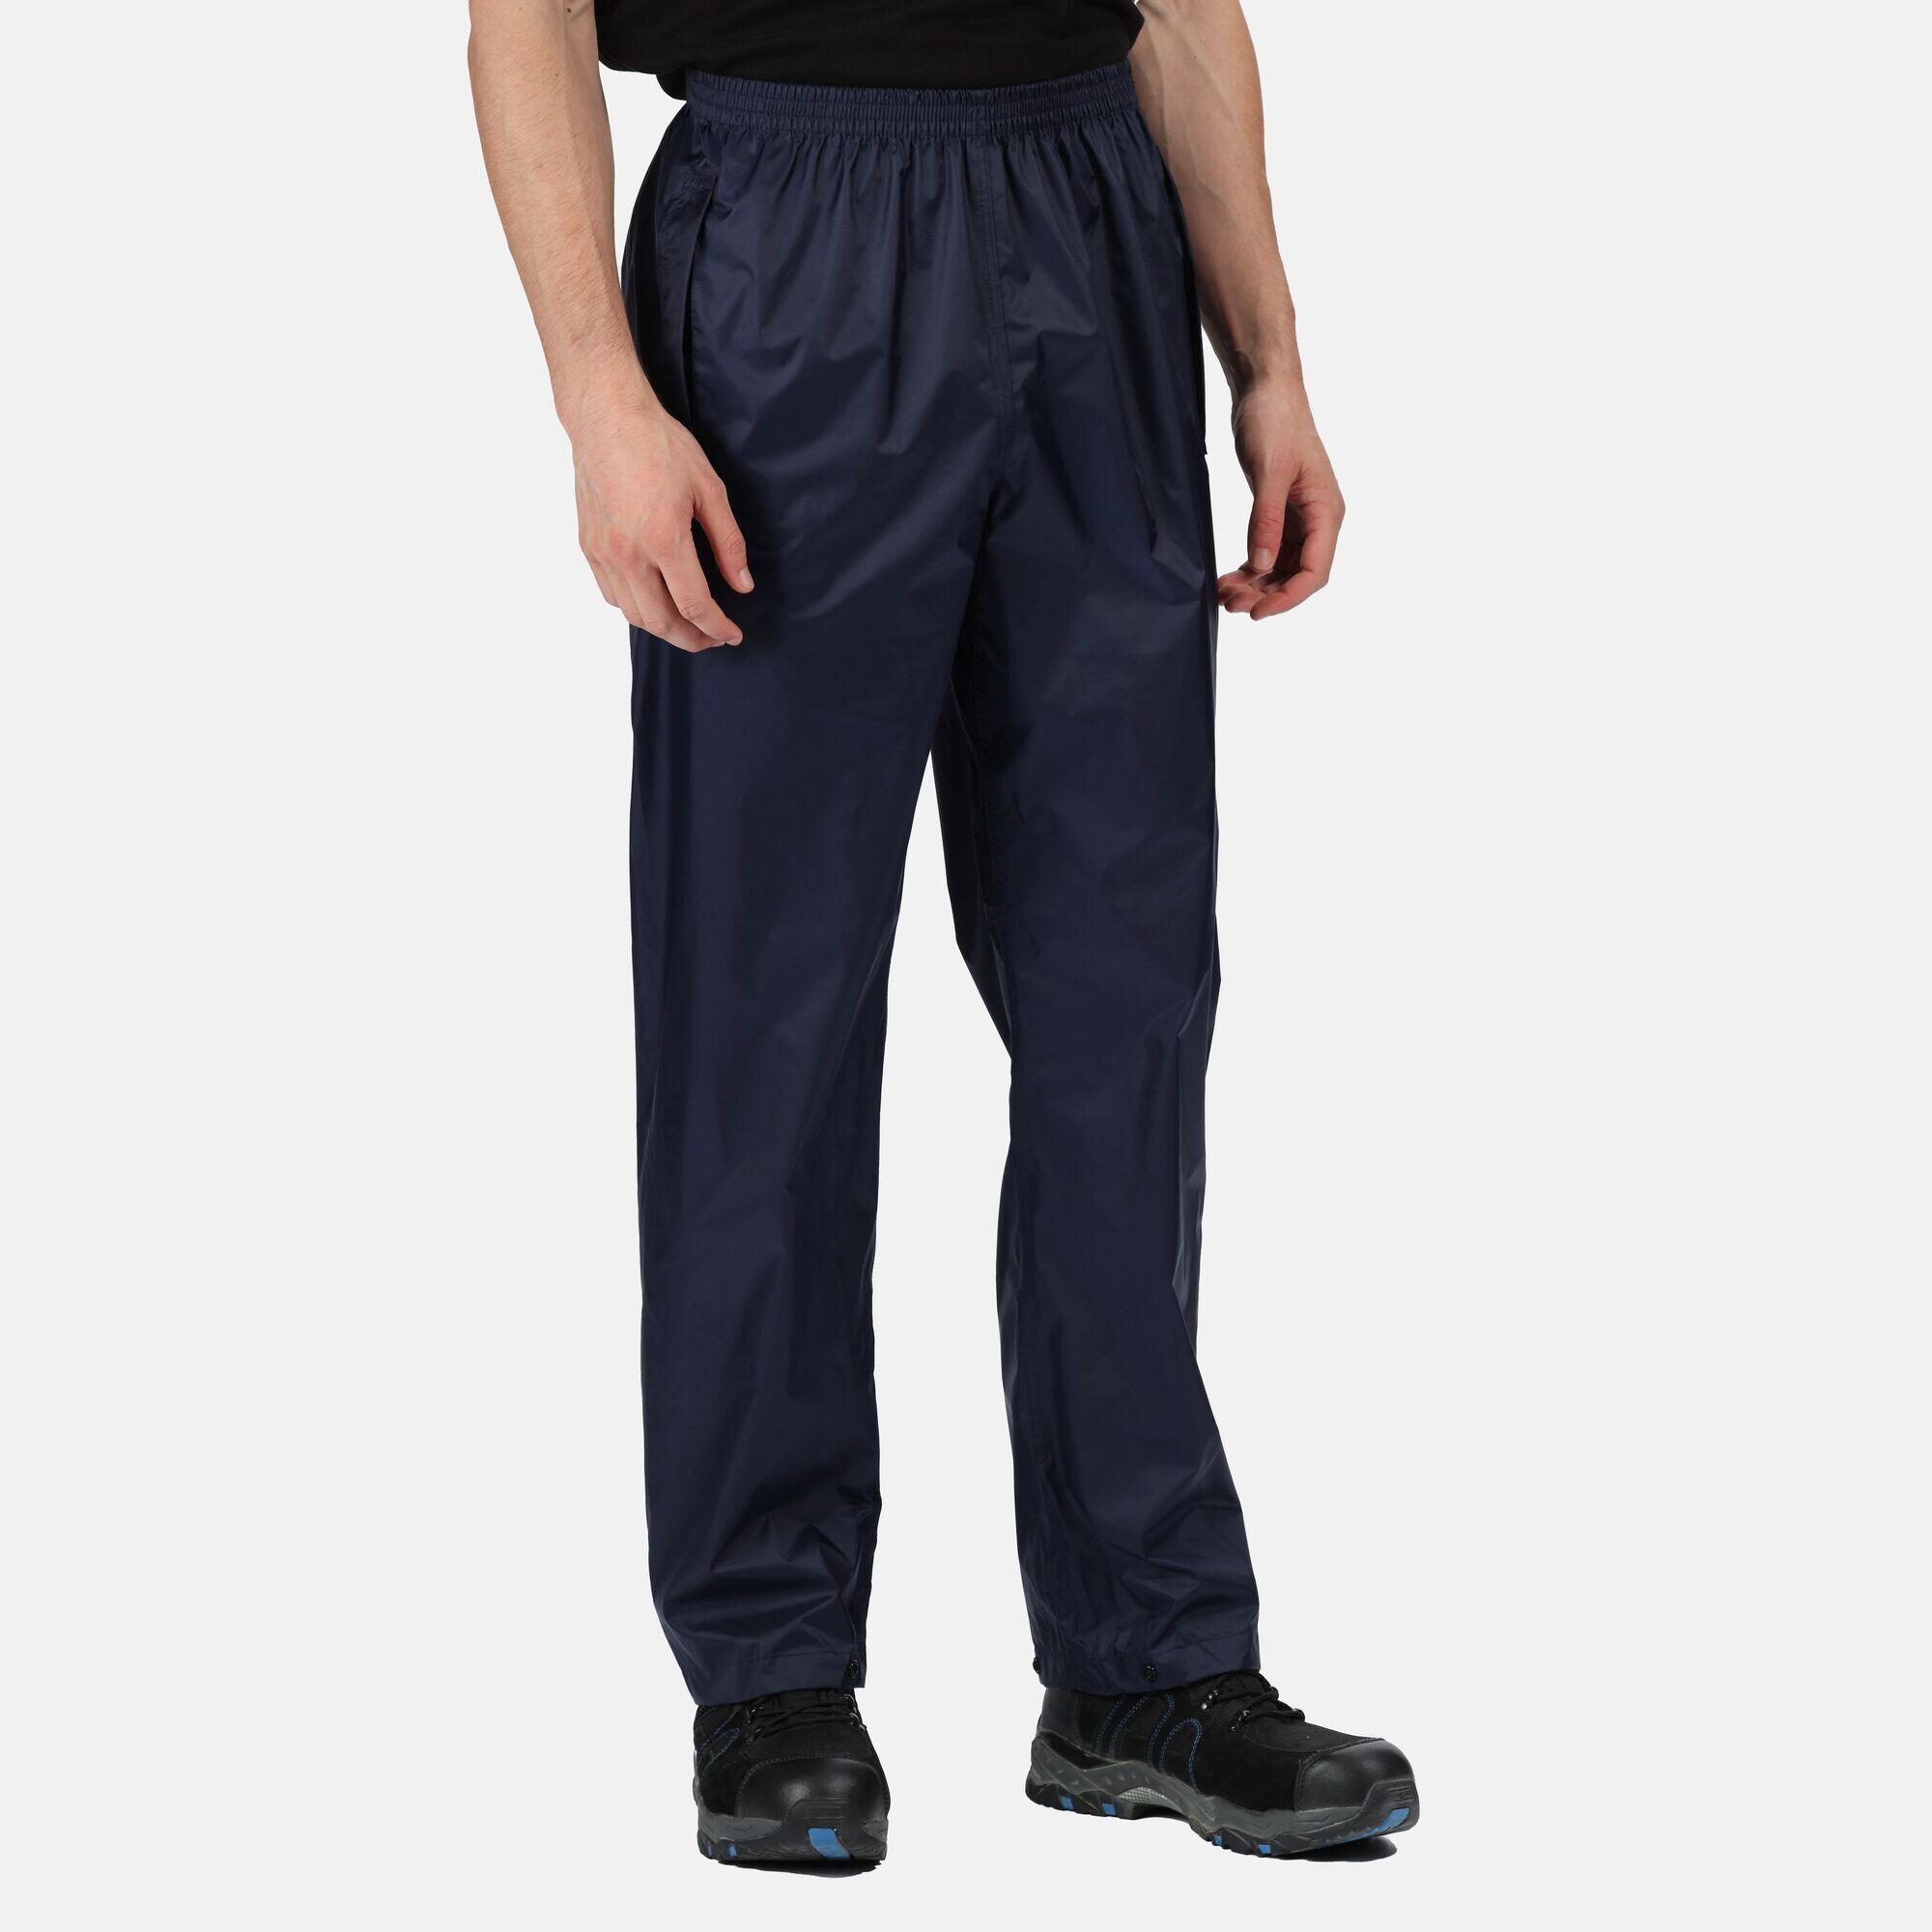 Mens Pro Packaway Overtrousers (Navy) 2/4